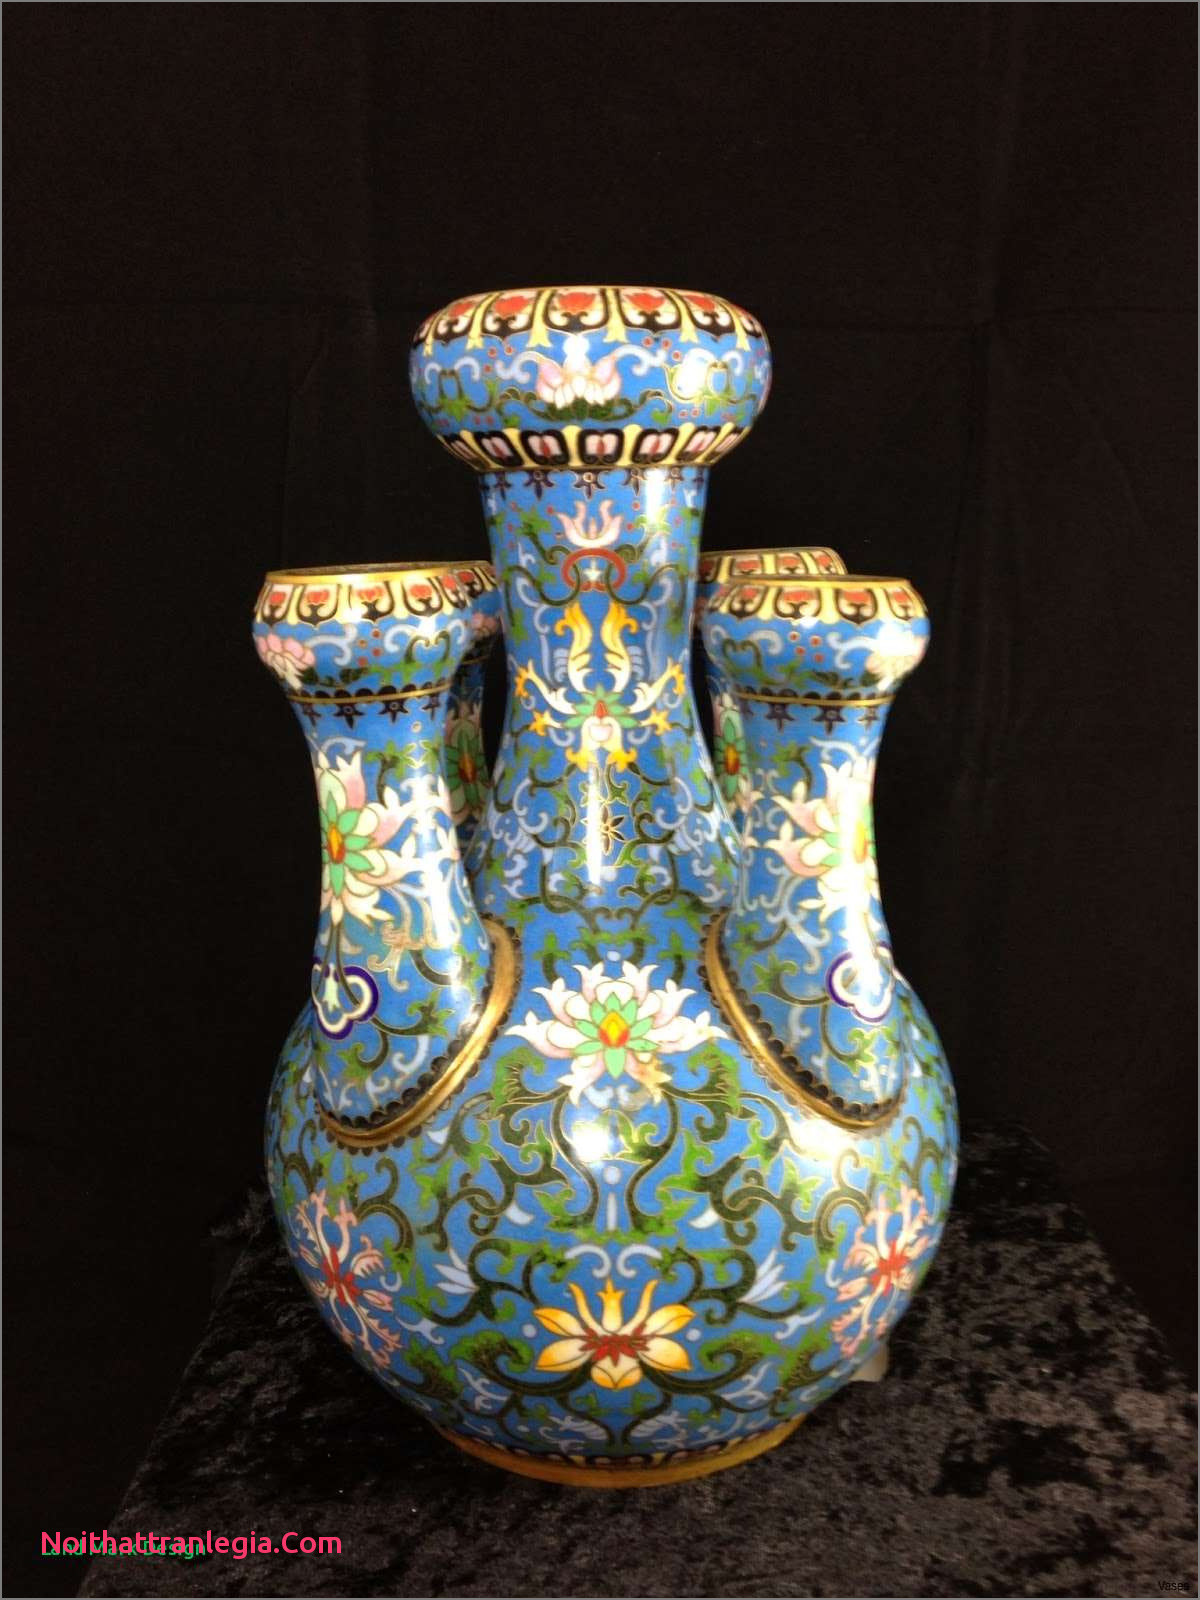 20 Cute Chinese Cloisonne Vase Value 2024 free download chinese cloisonne vase value of 20 chinese antique vase noithattranlegia vases design for 213 1h vases antique asian the increased trade of chinese ware during 16th century has significantly